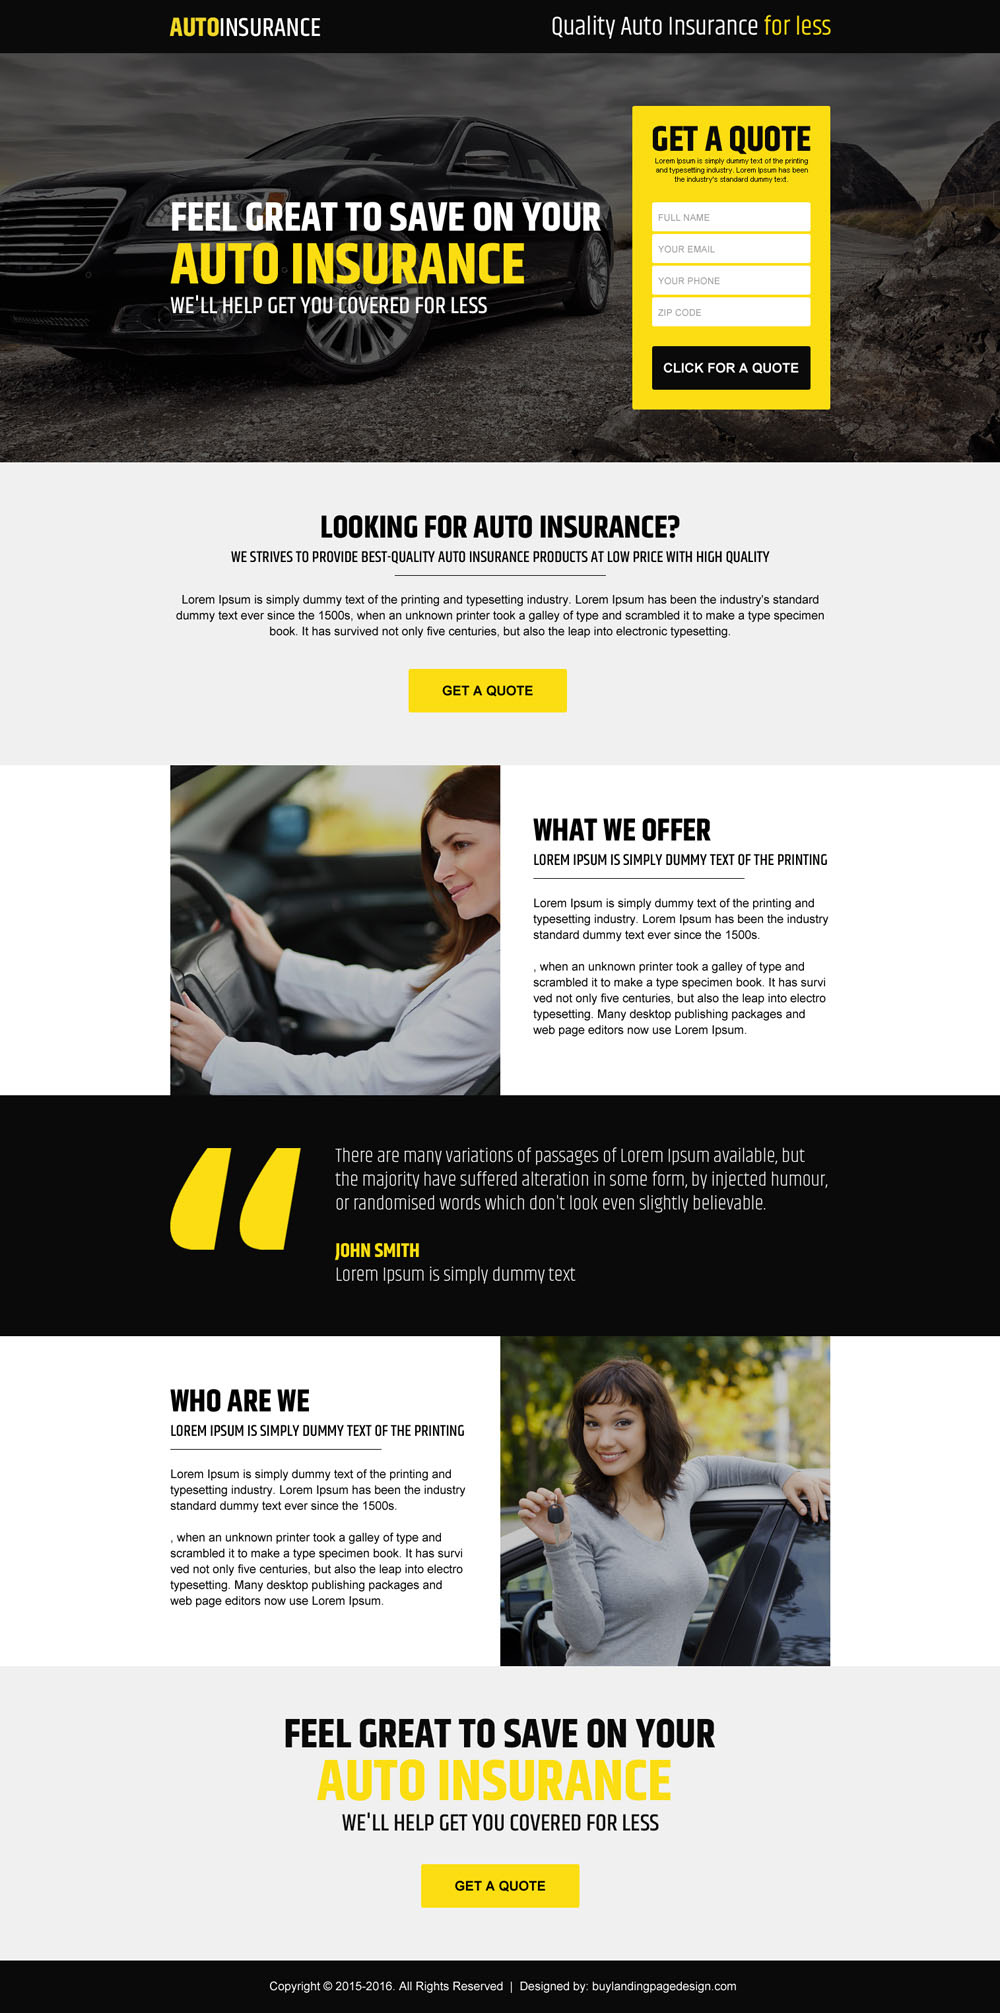 quality-auto-insurance-free-quote-for-less-money-lead-gen-landing-page-design-041